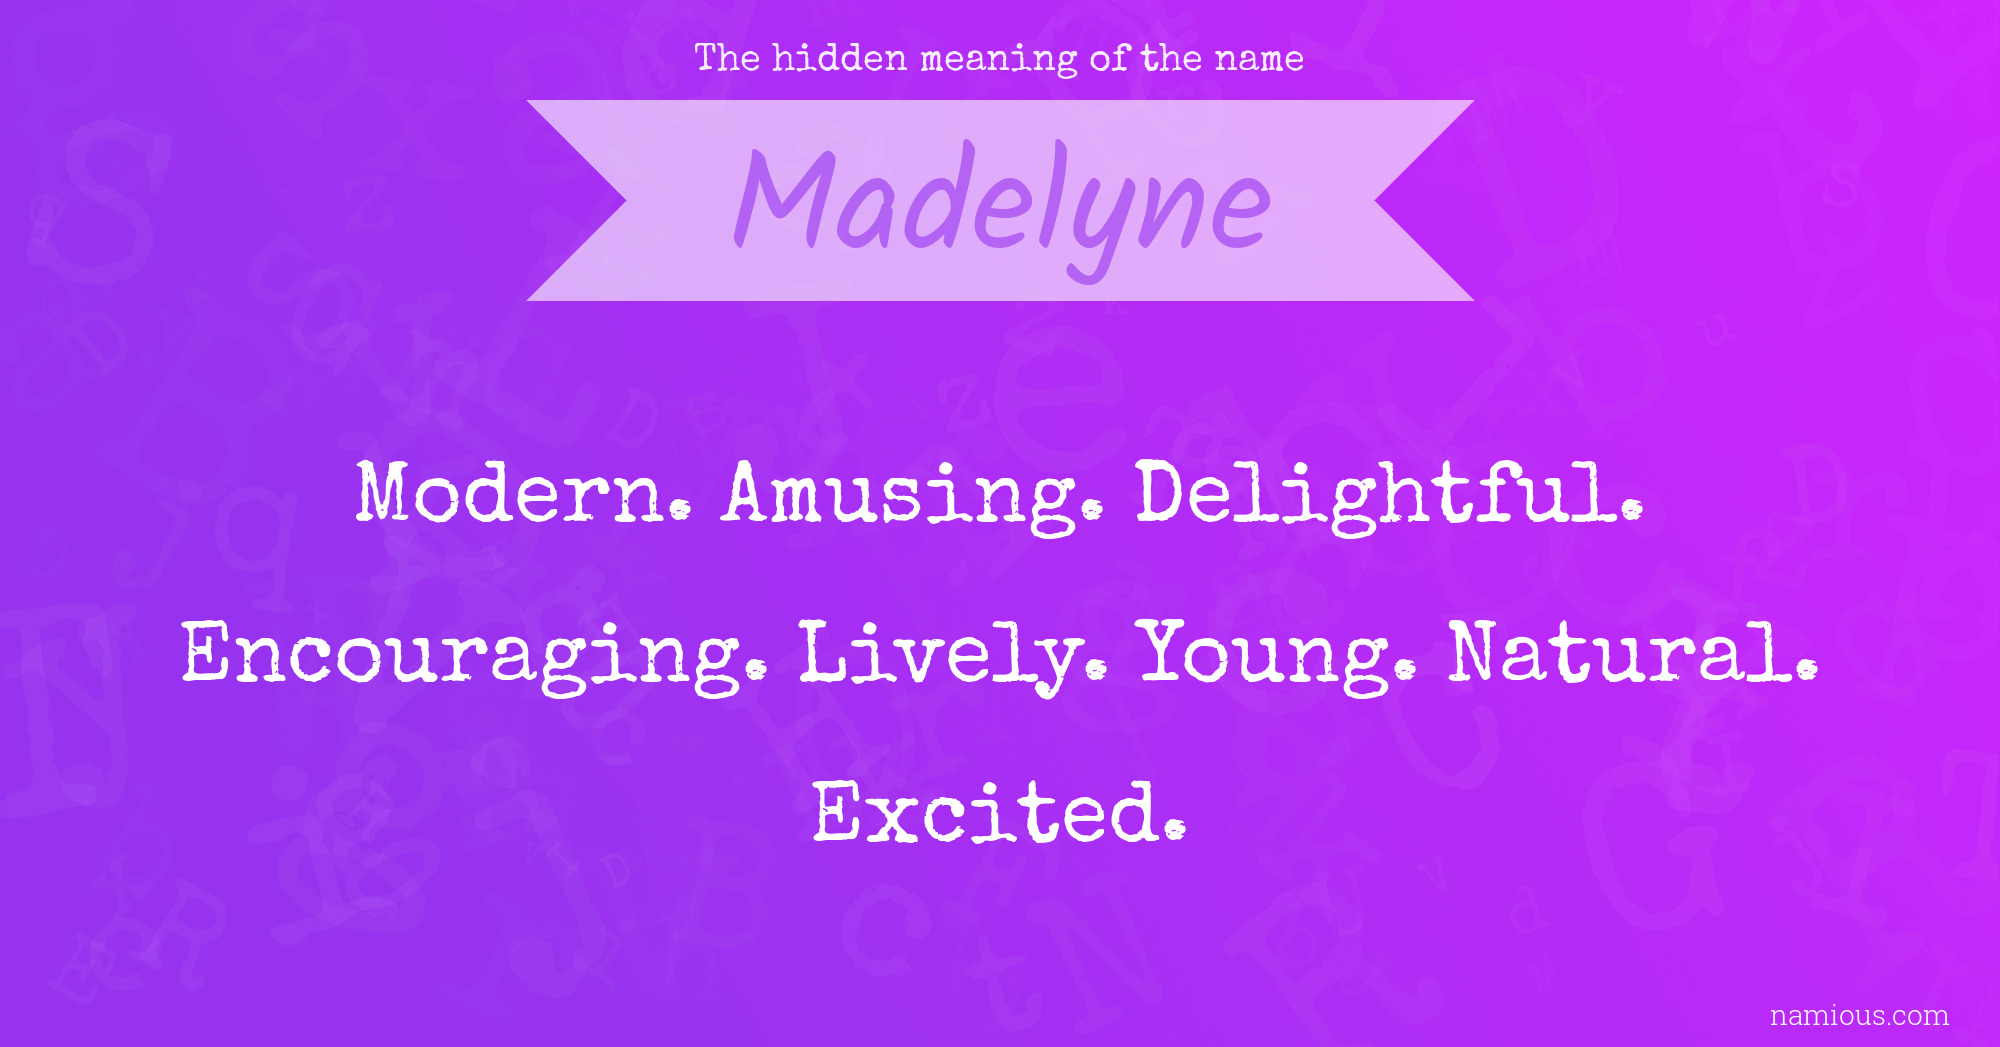 The hidden meaning of the name Madelyne